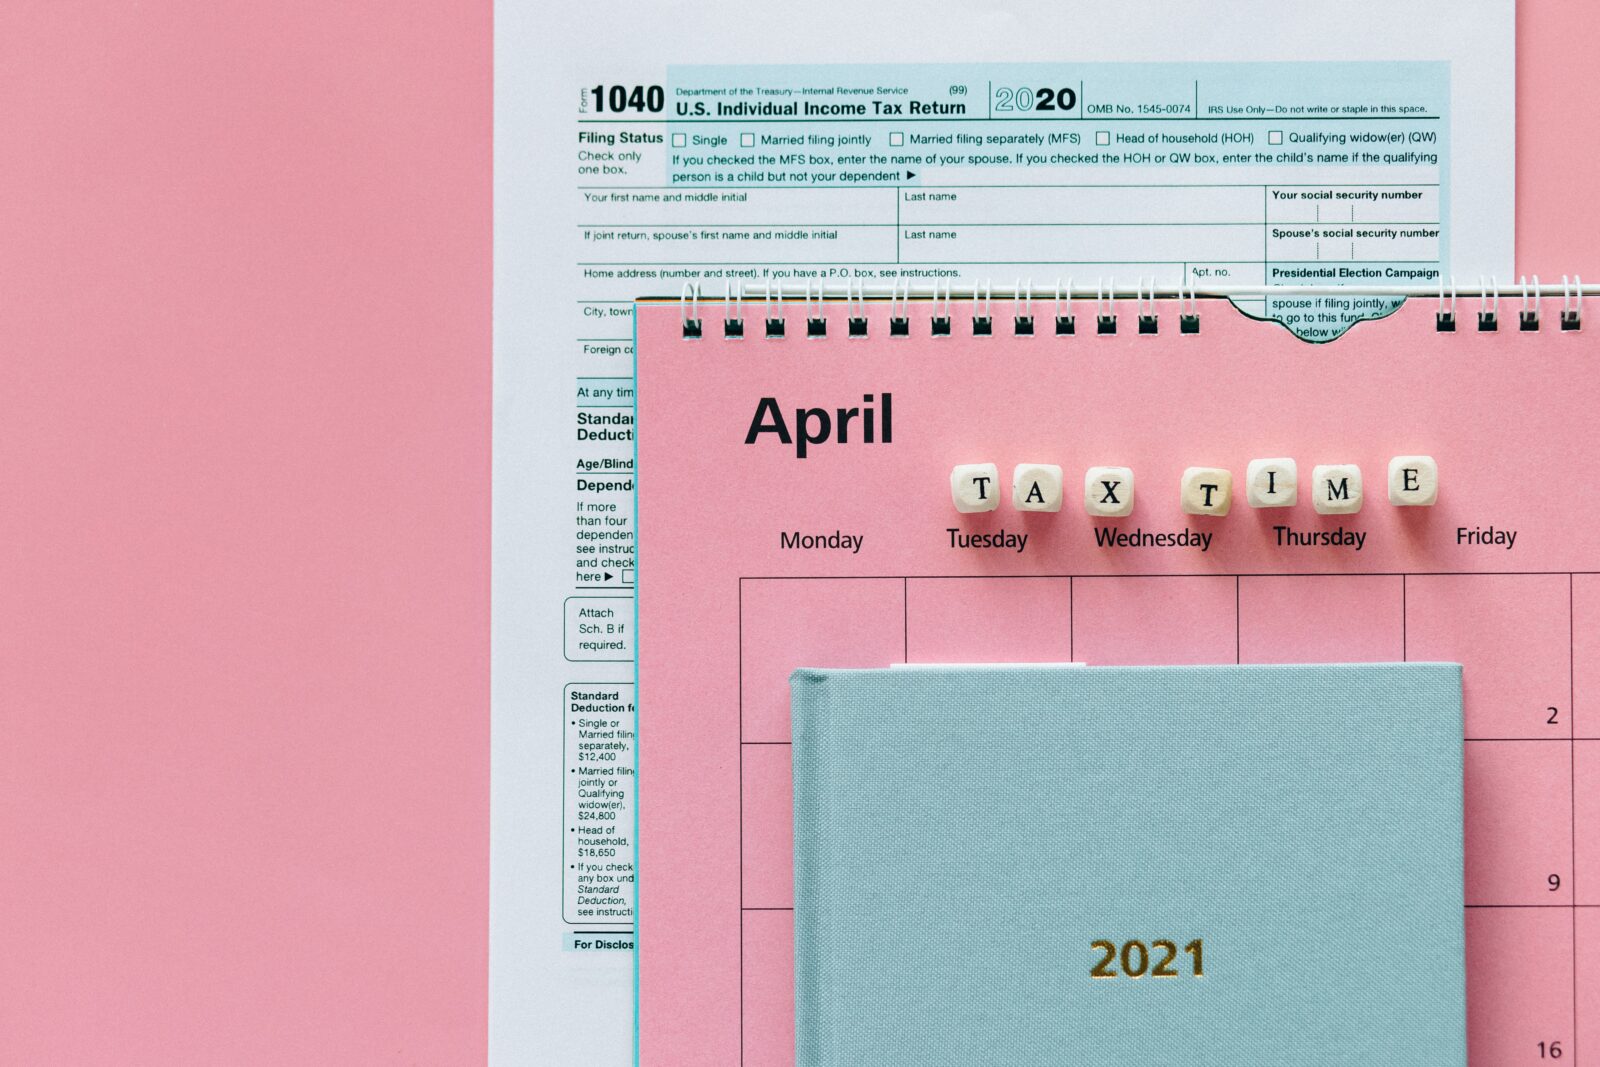 IRS: There Are Crucial Actions to Take to Minimize Delays Now that Tax Season is in Full Force